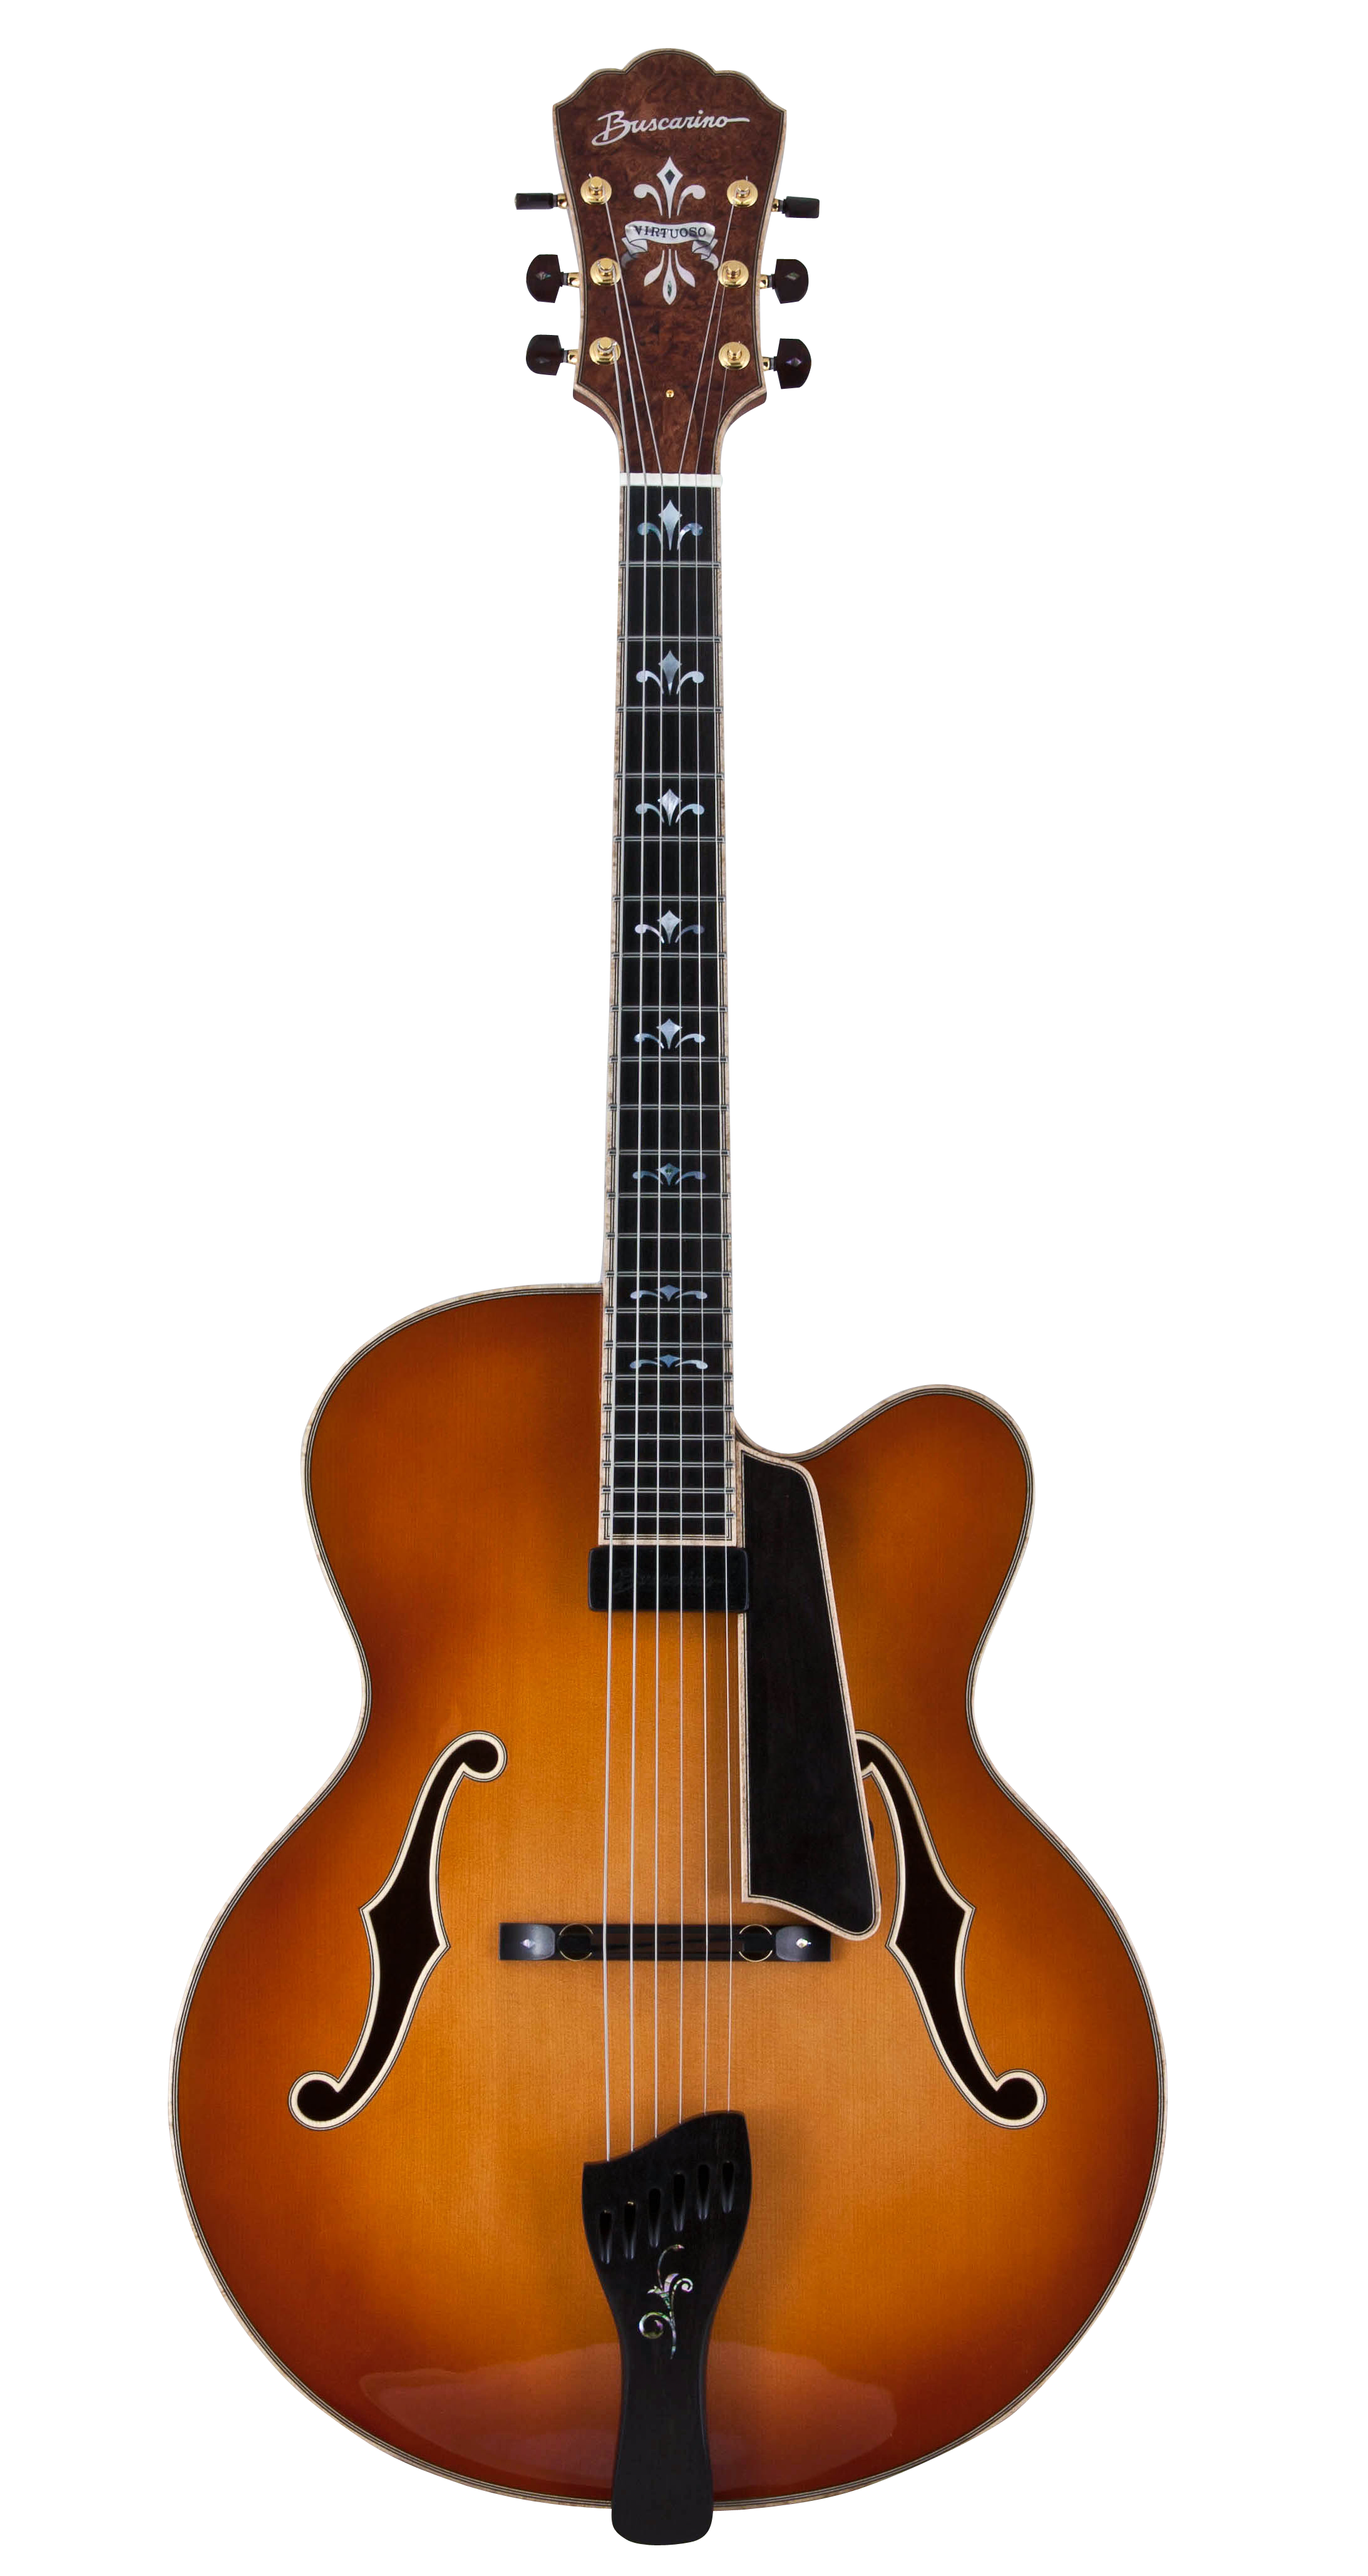 The Virtuoso Archtop